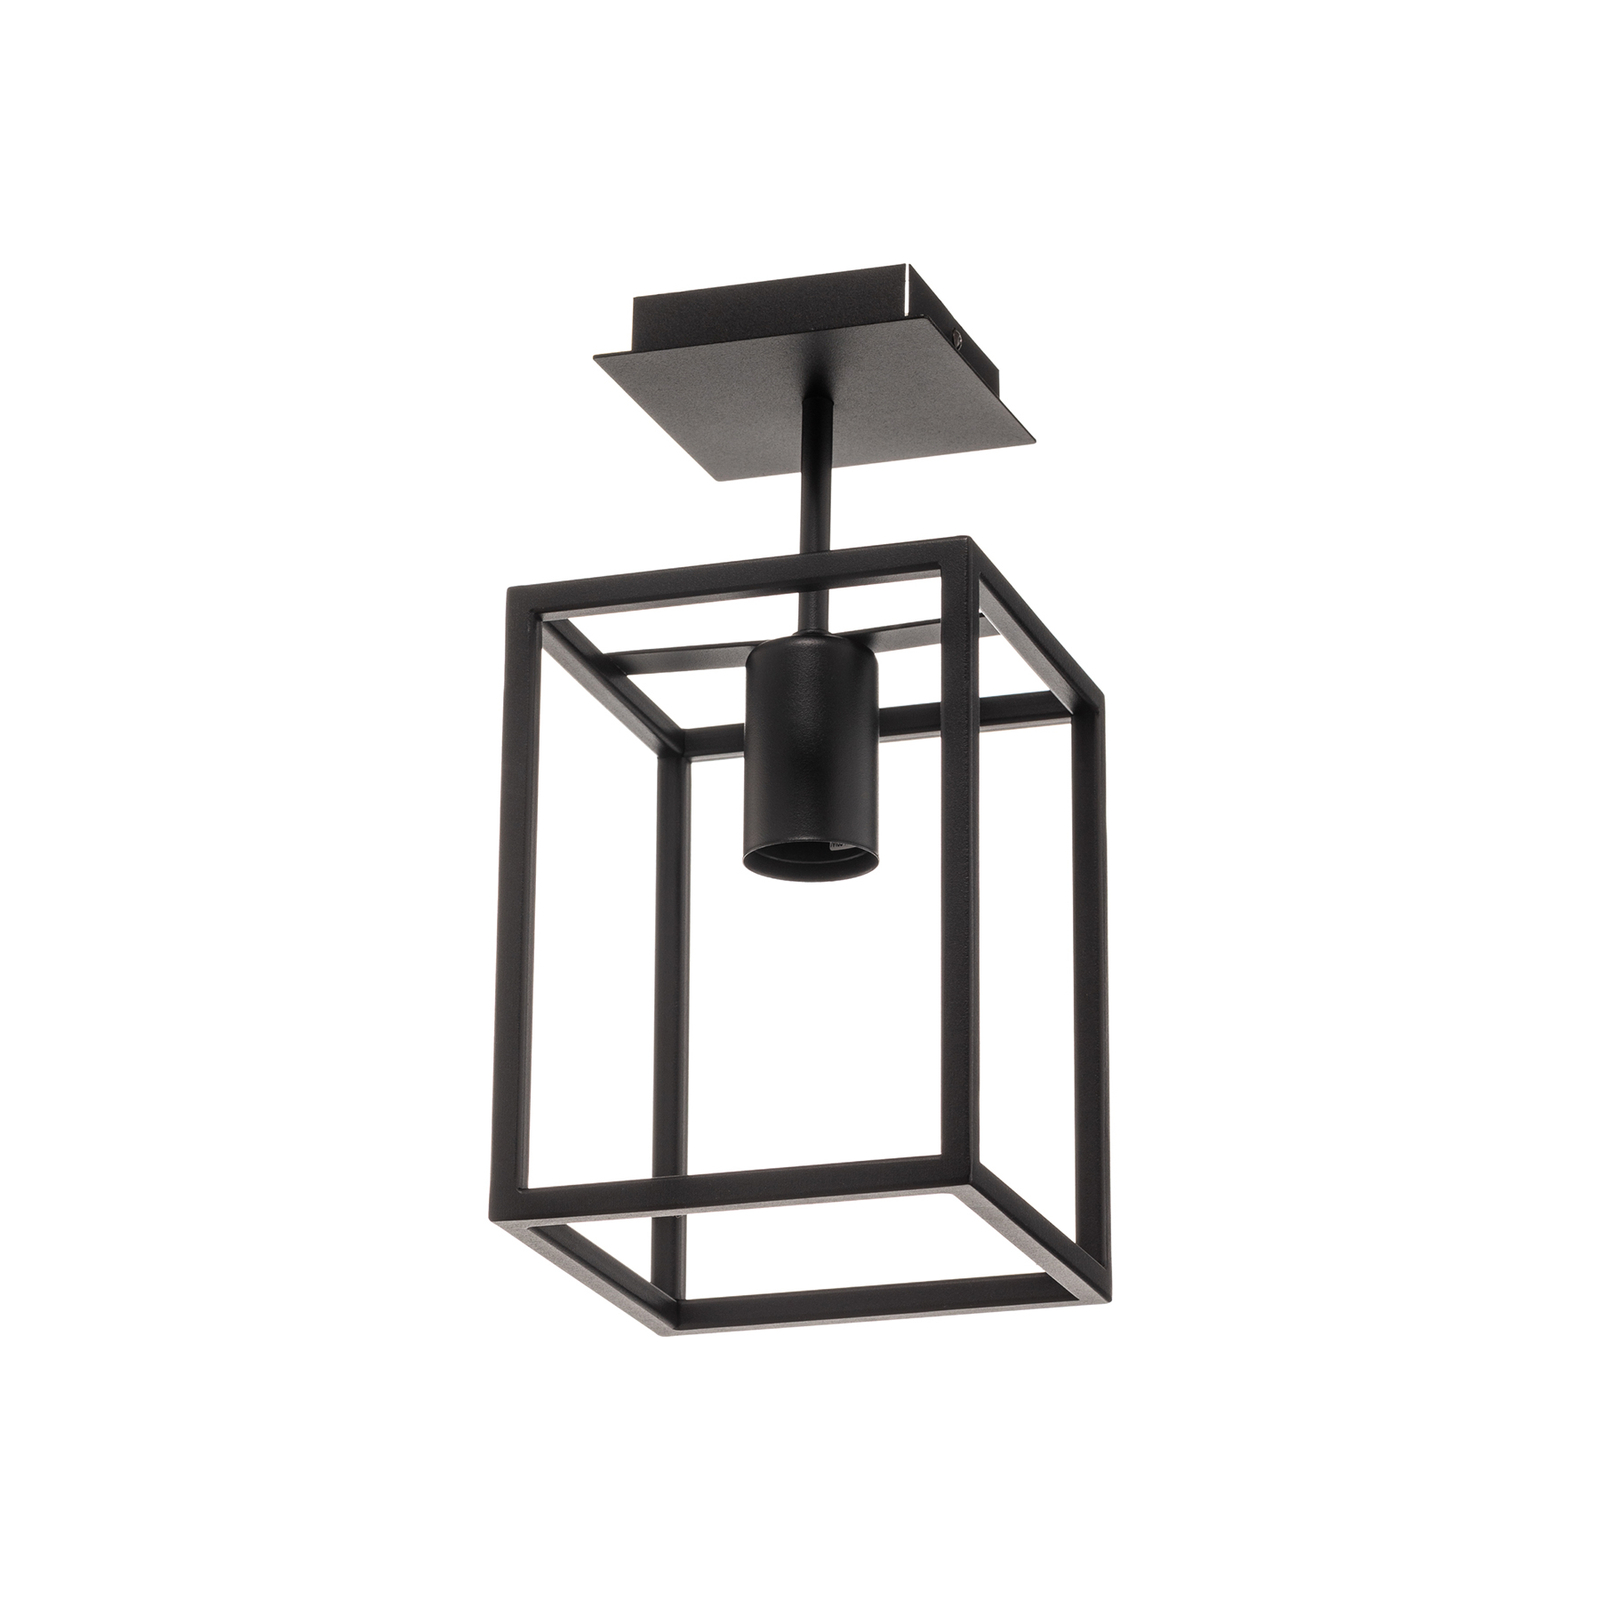 Crate ceiling light made of steel, one-bulb